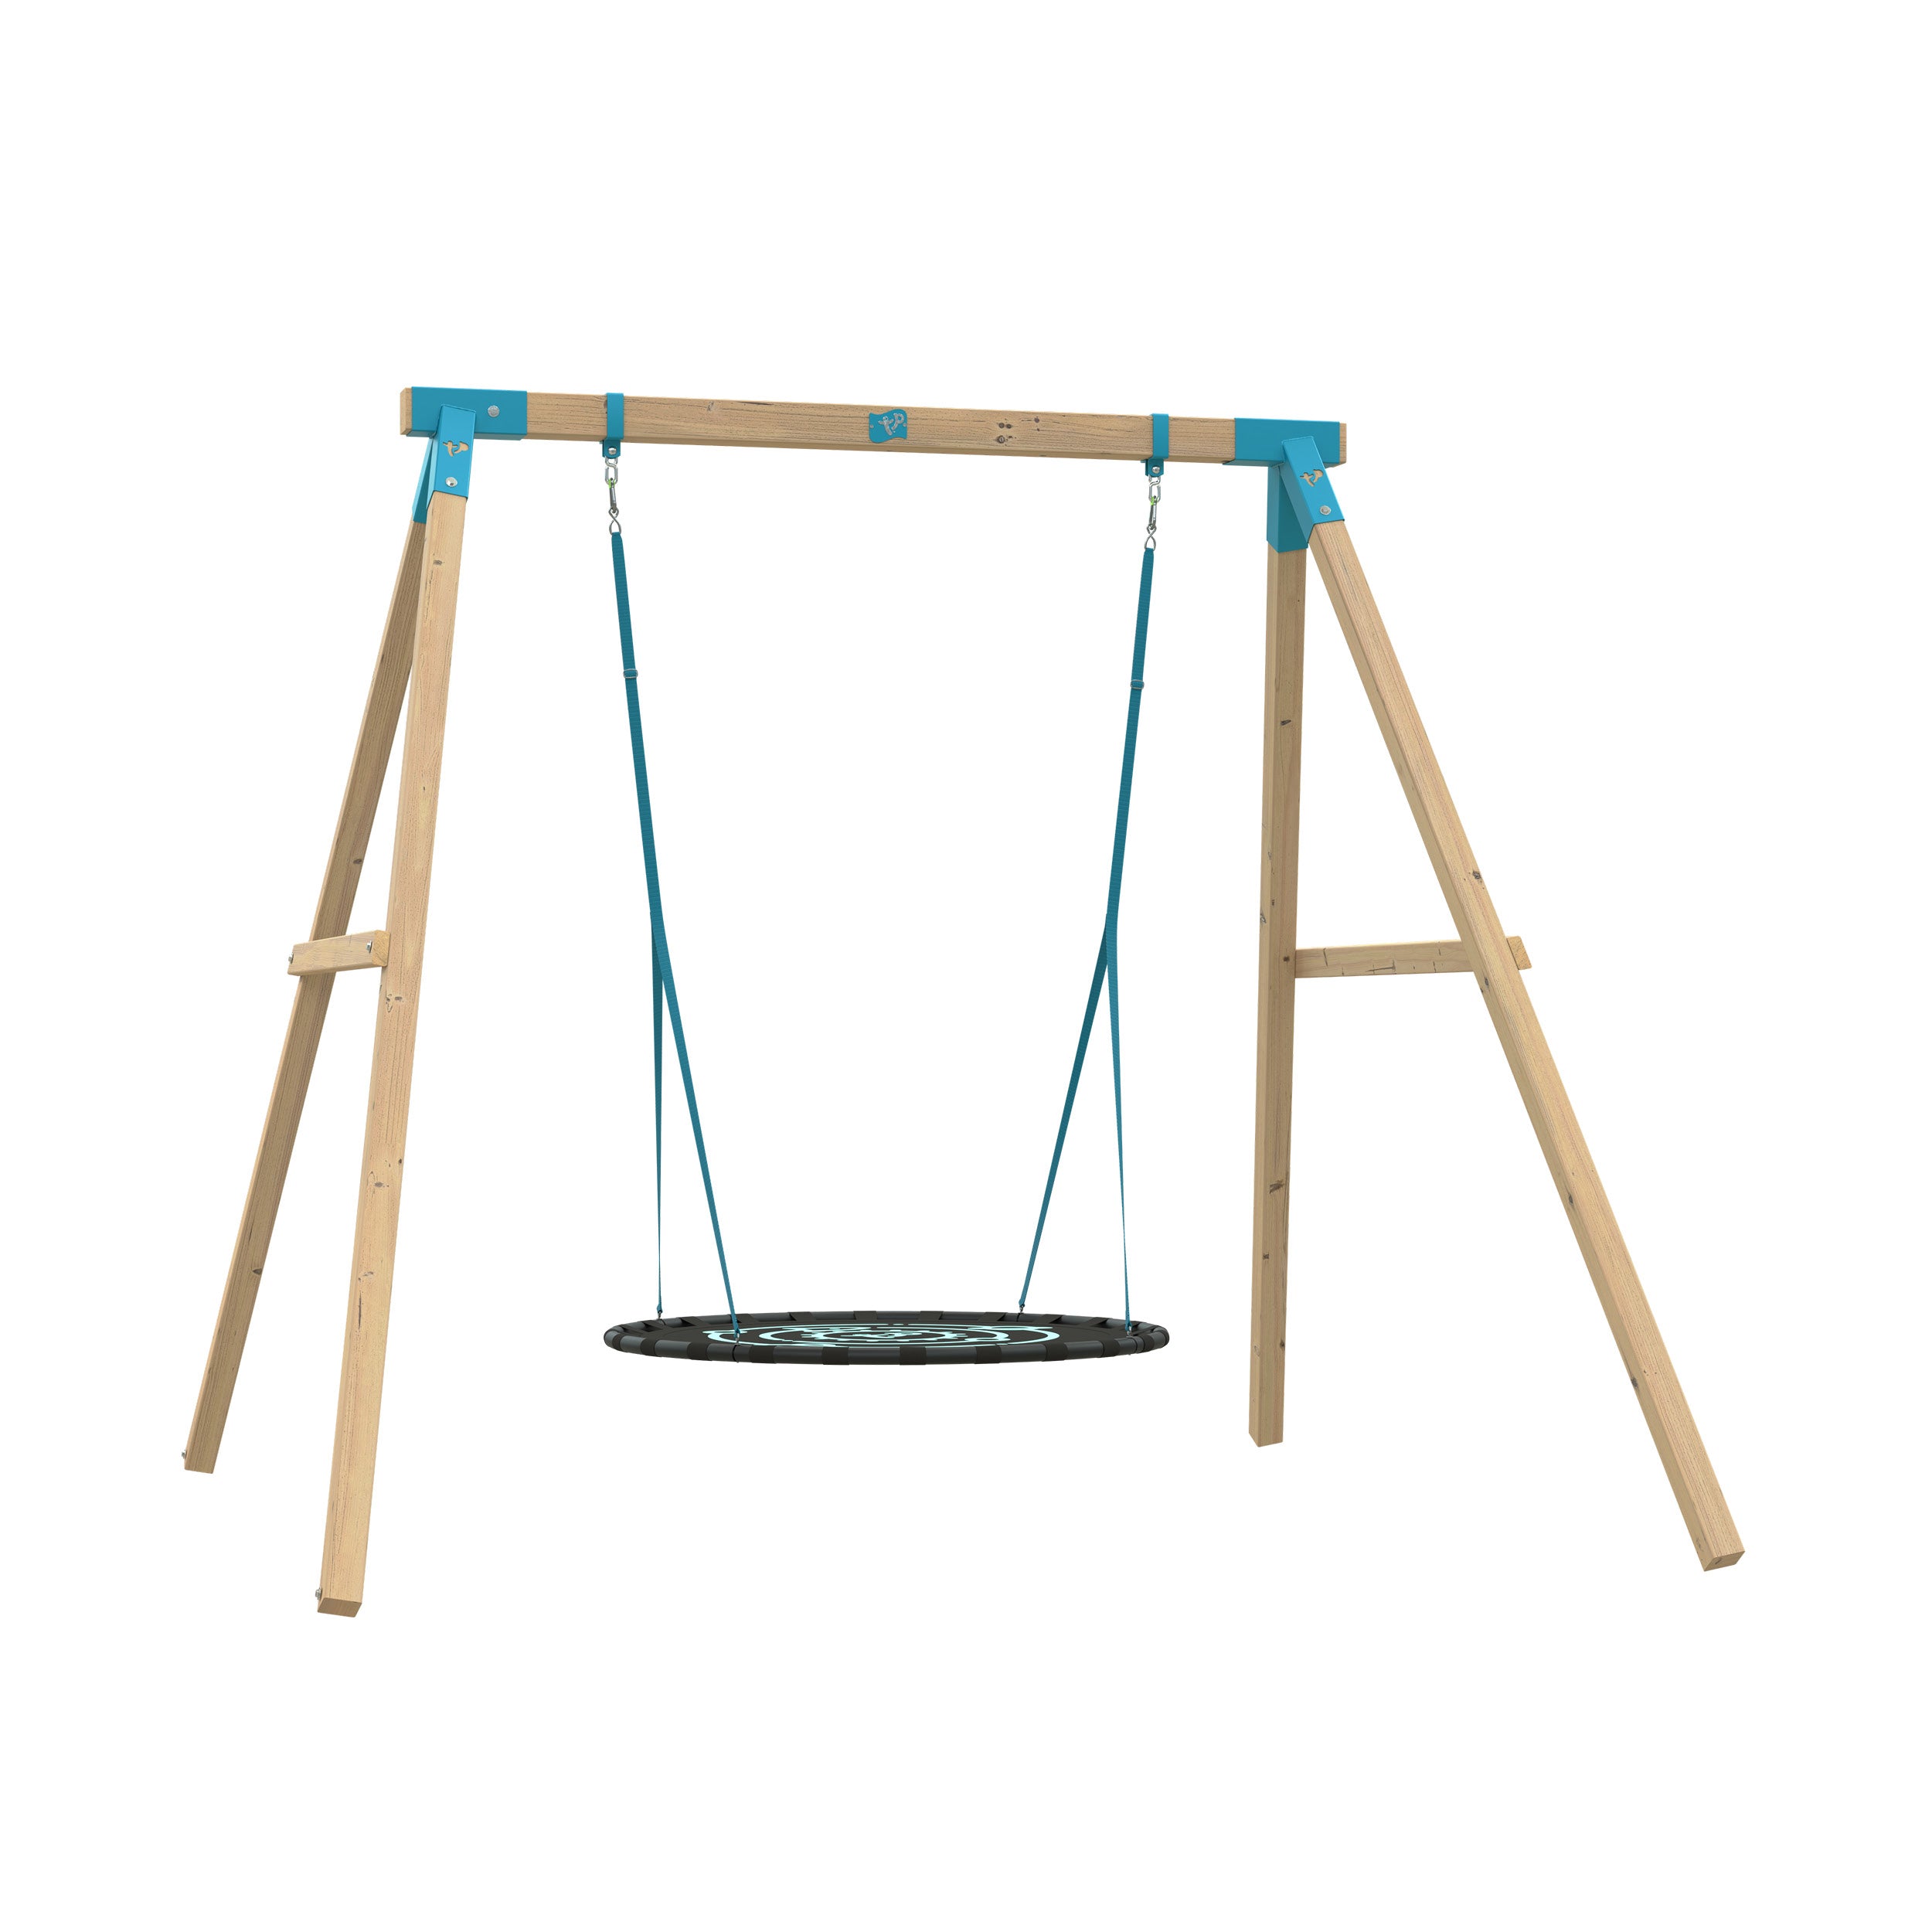 TP Kingswood Double Swing Squarewood Set with Giant Nest Swing - FSC<sup>®</sup> certified